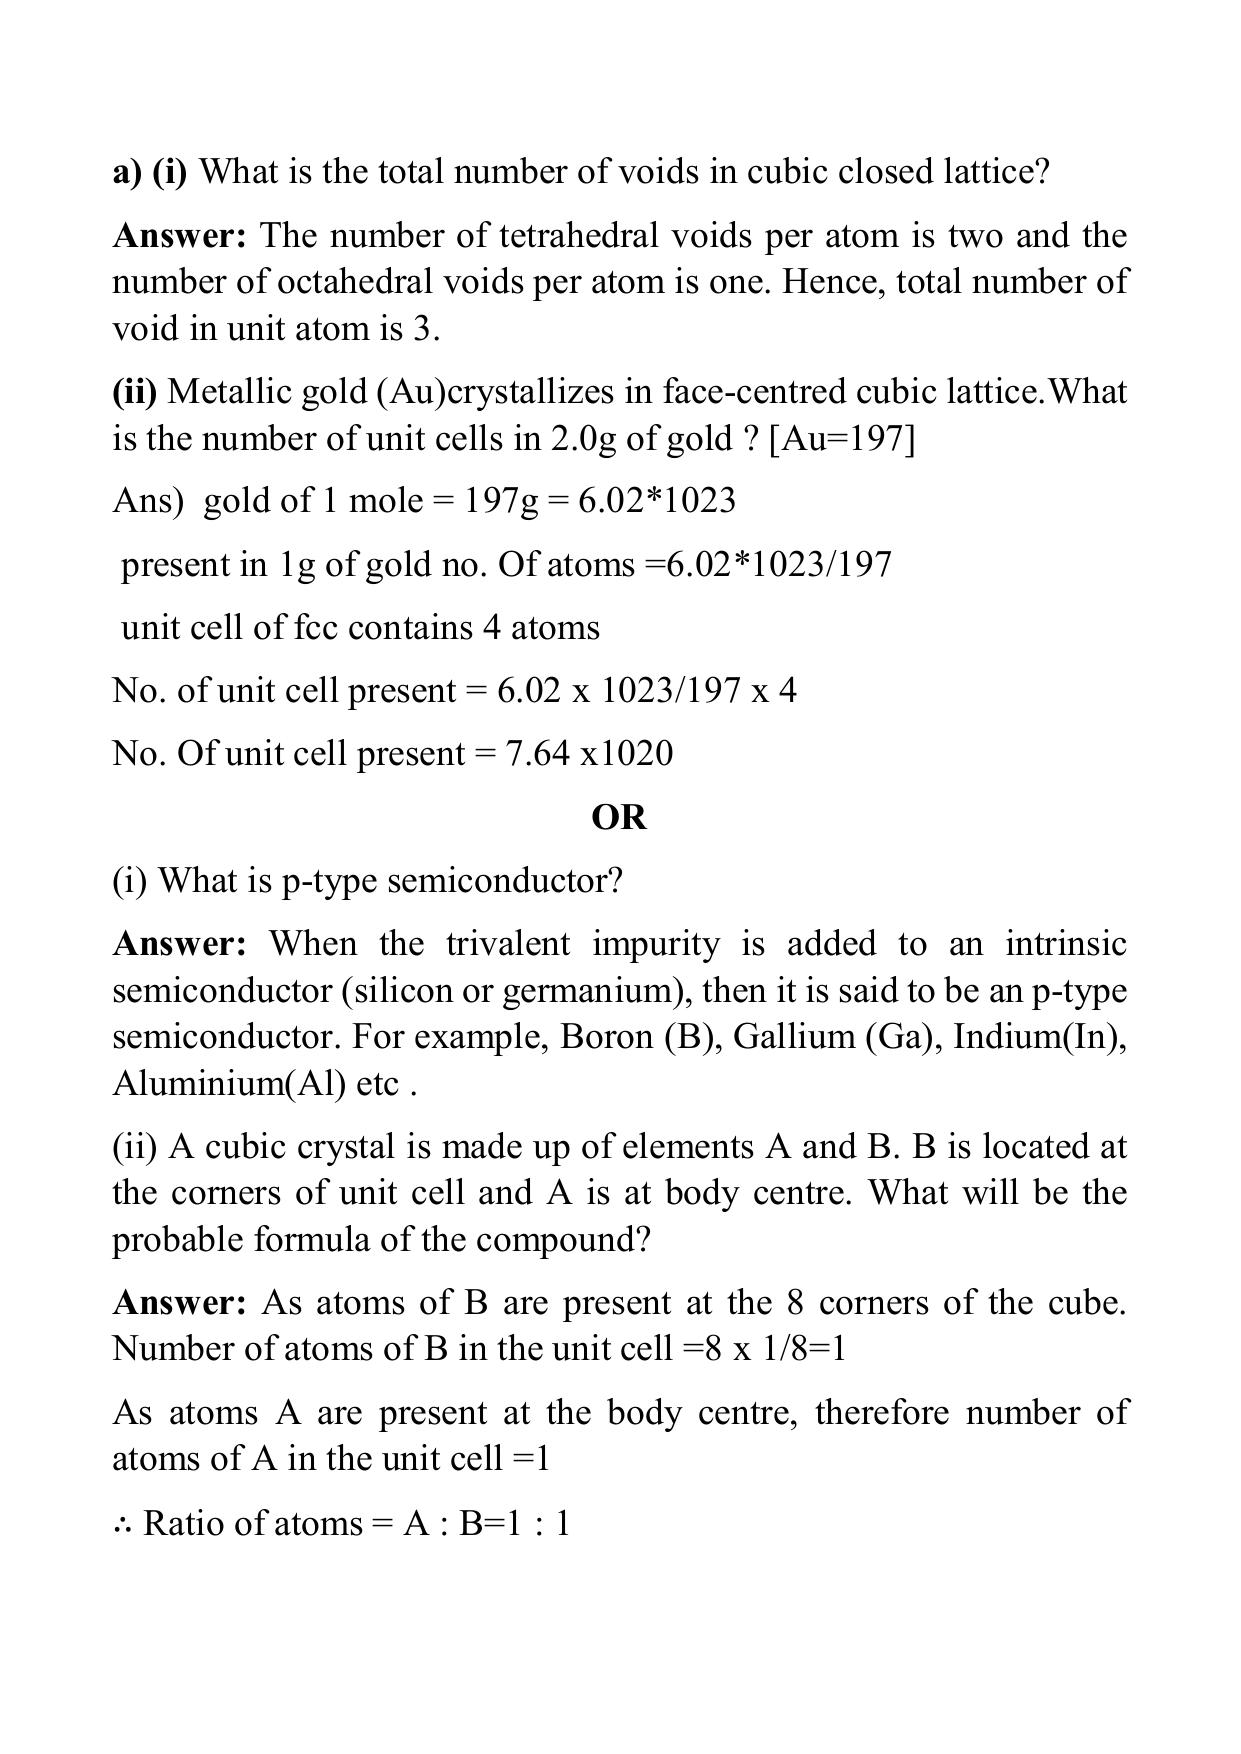 West Bengal Board Class 12 Chemistry 2018 Question Paper - Page 4